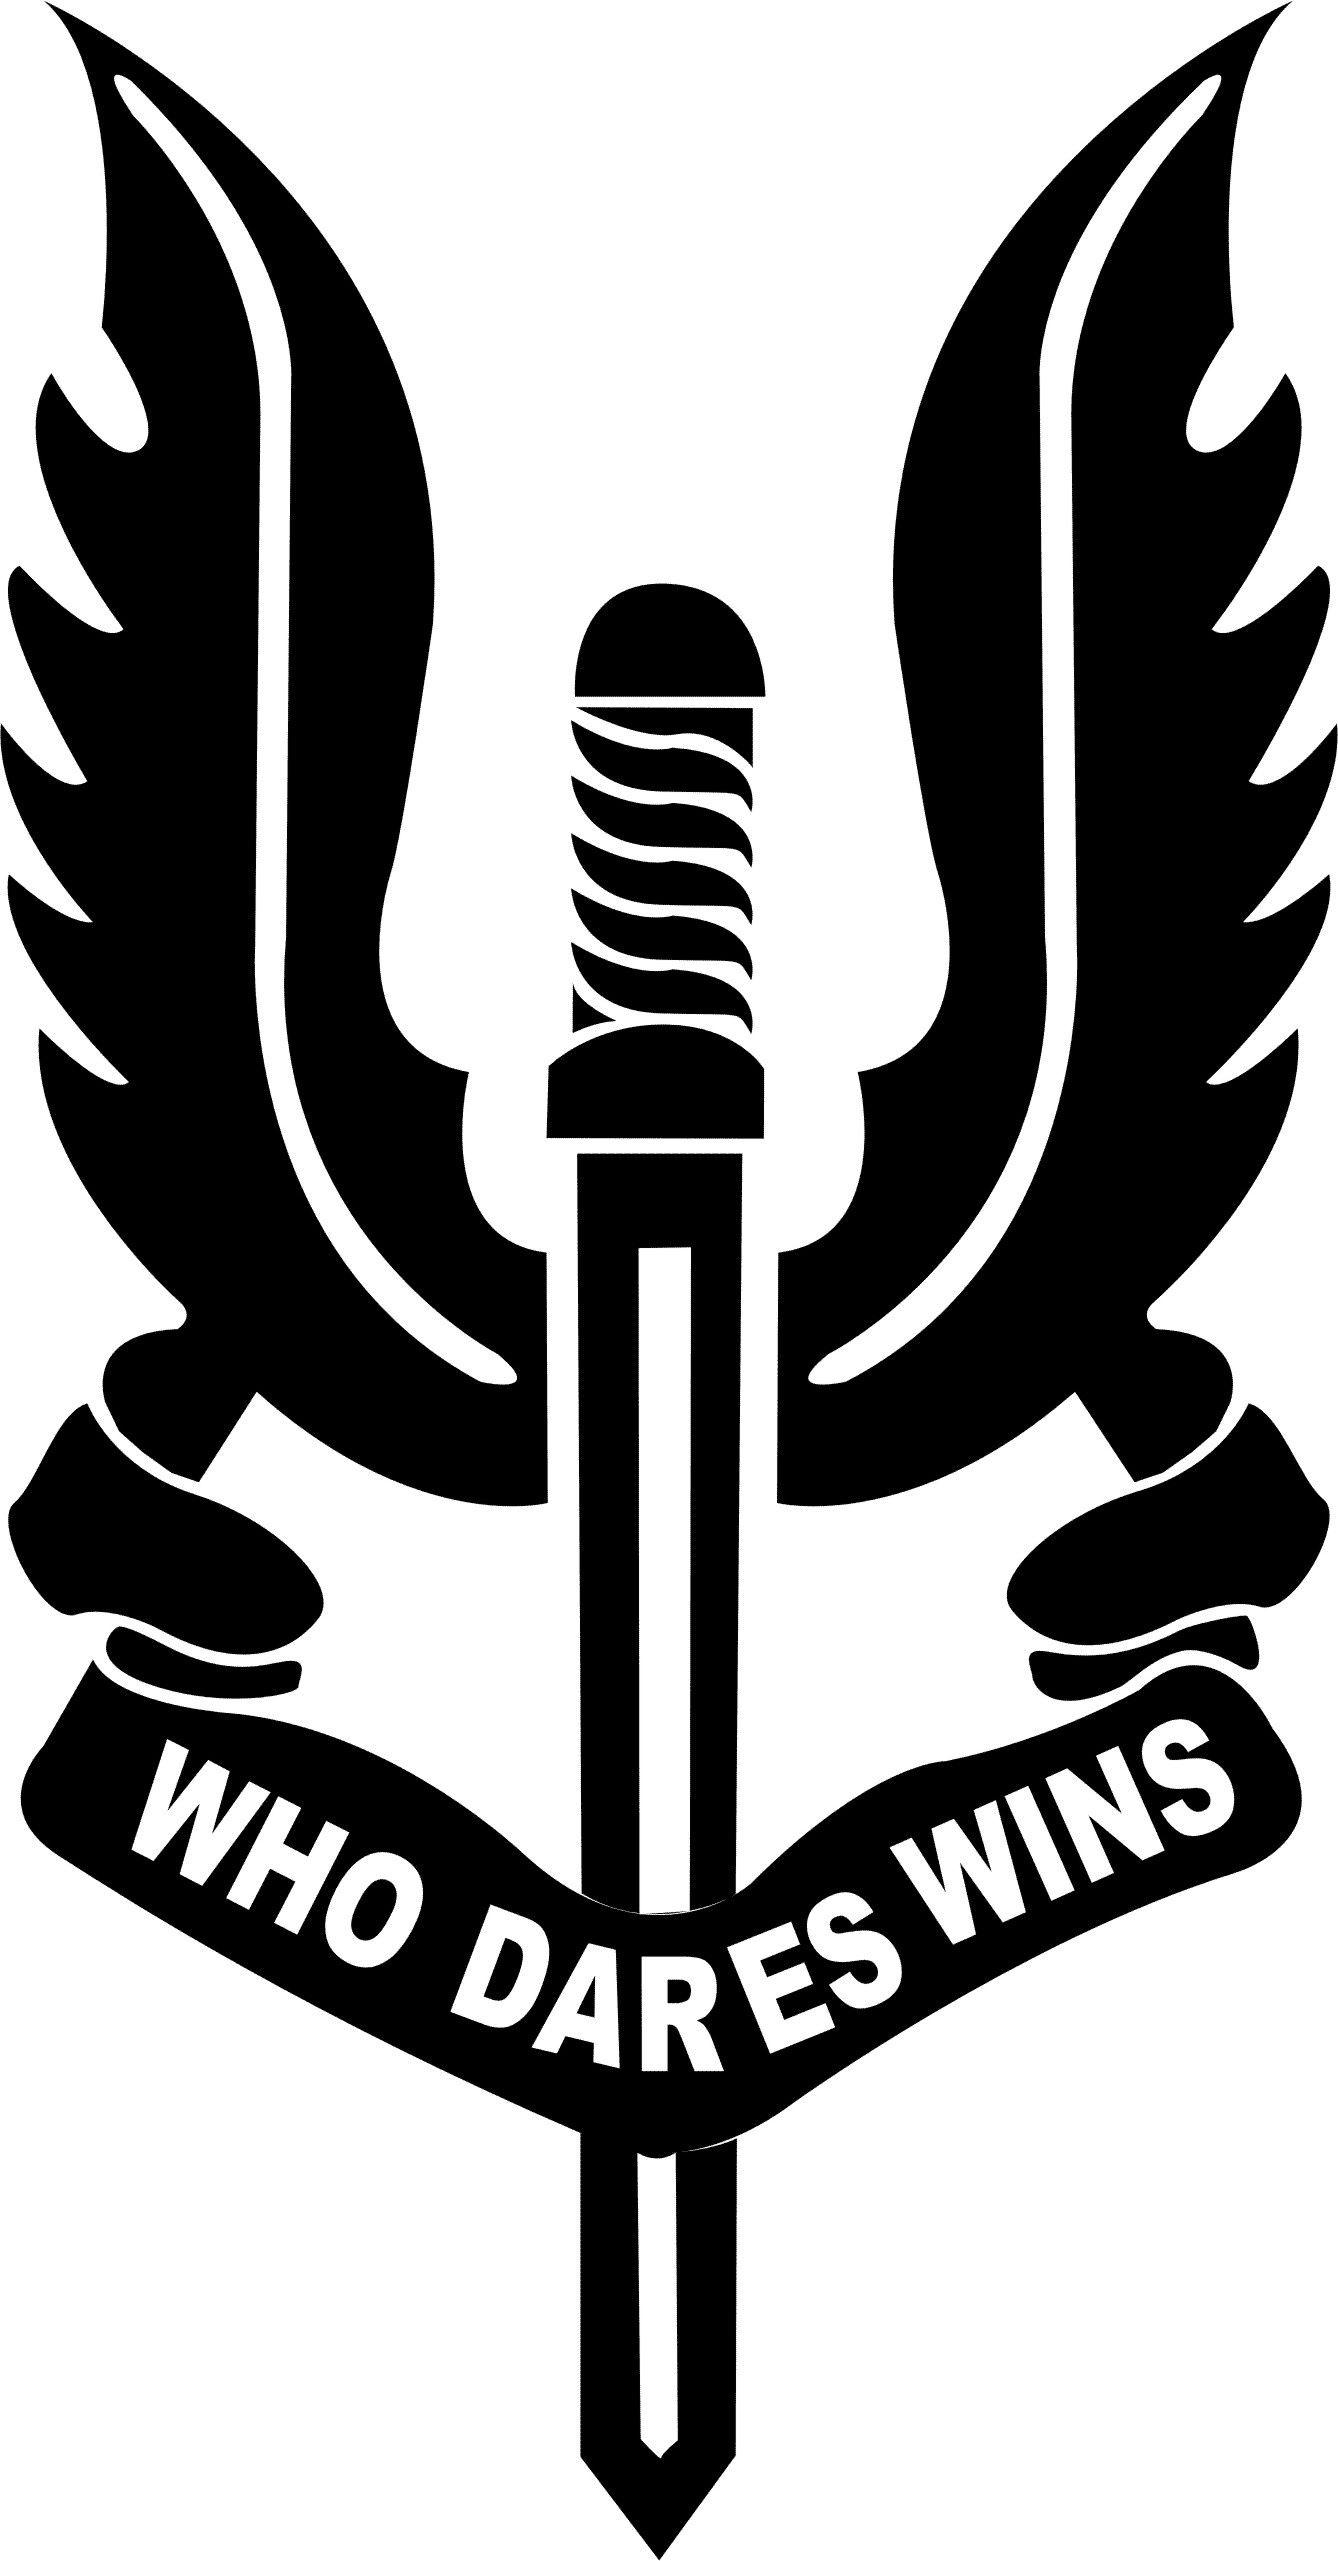 Who dares wins. Special forces logo, Special air service, Indian army special forces